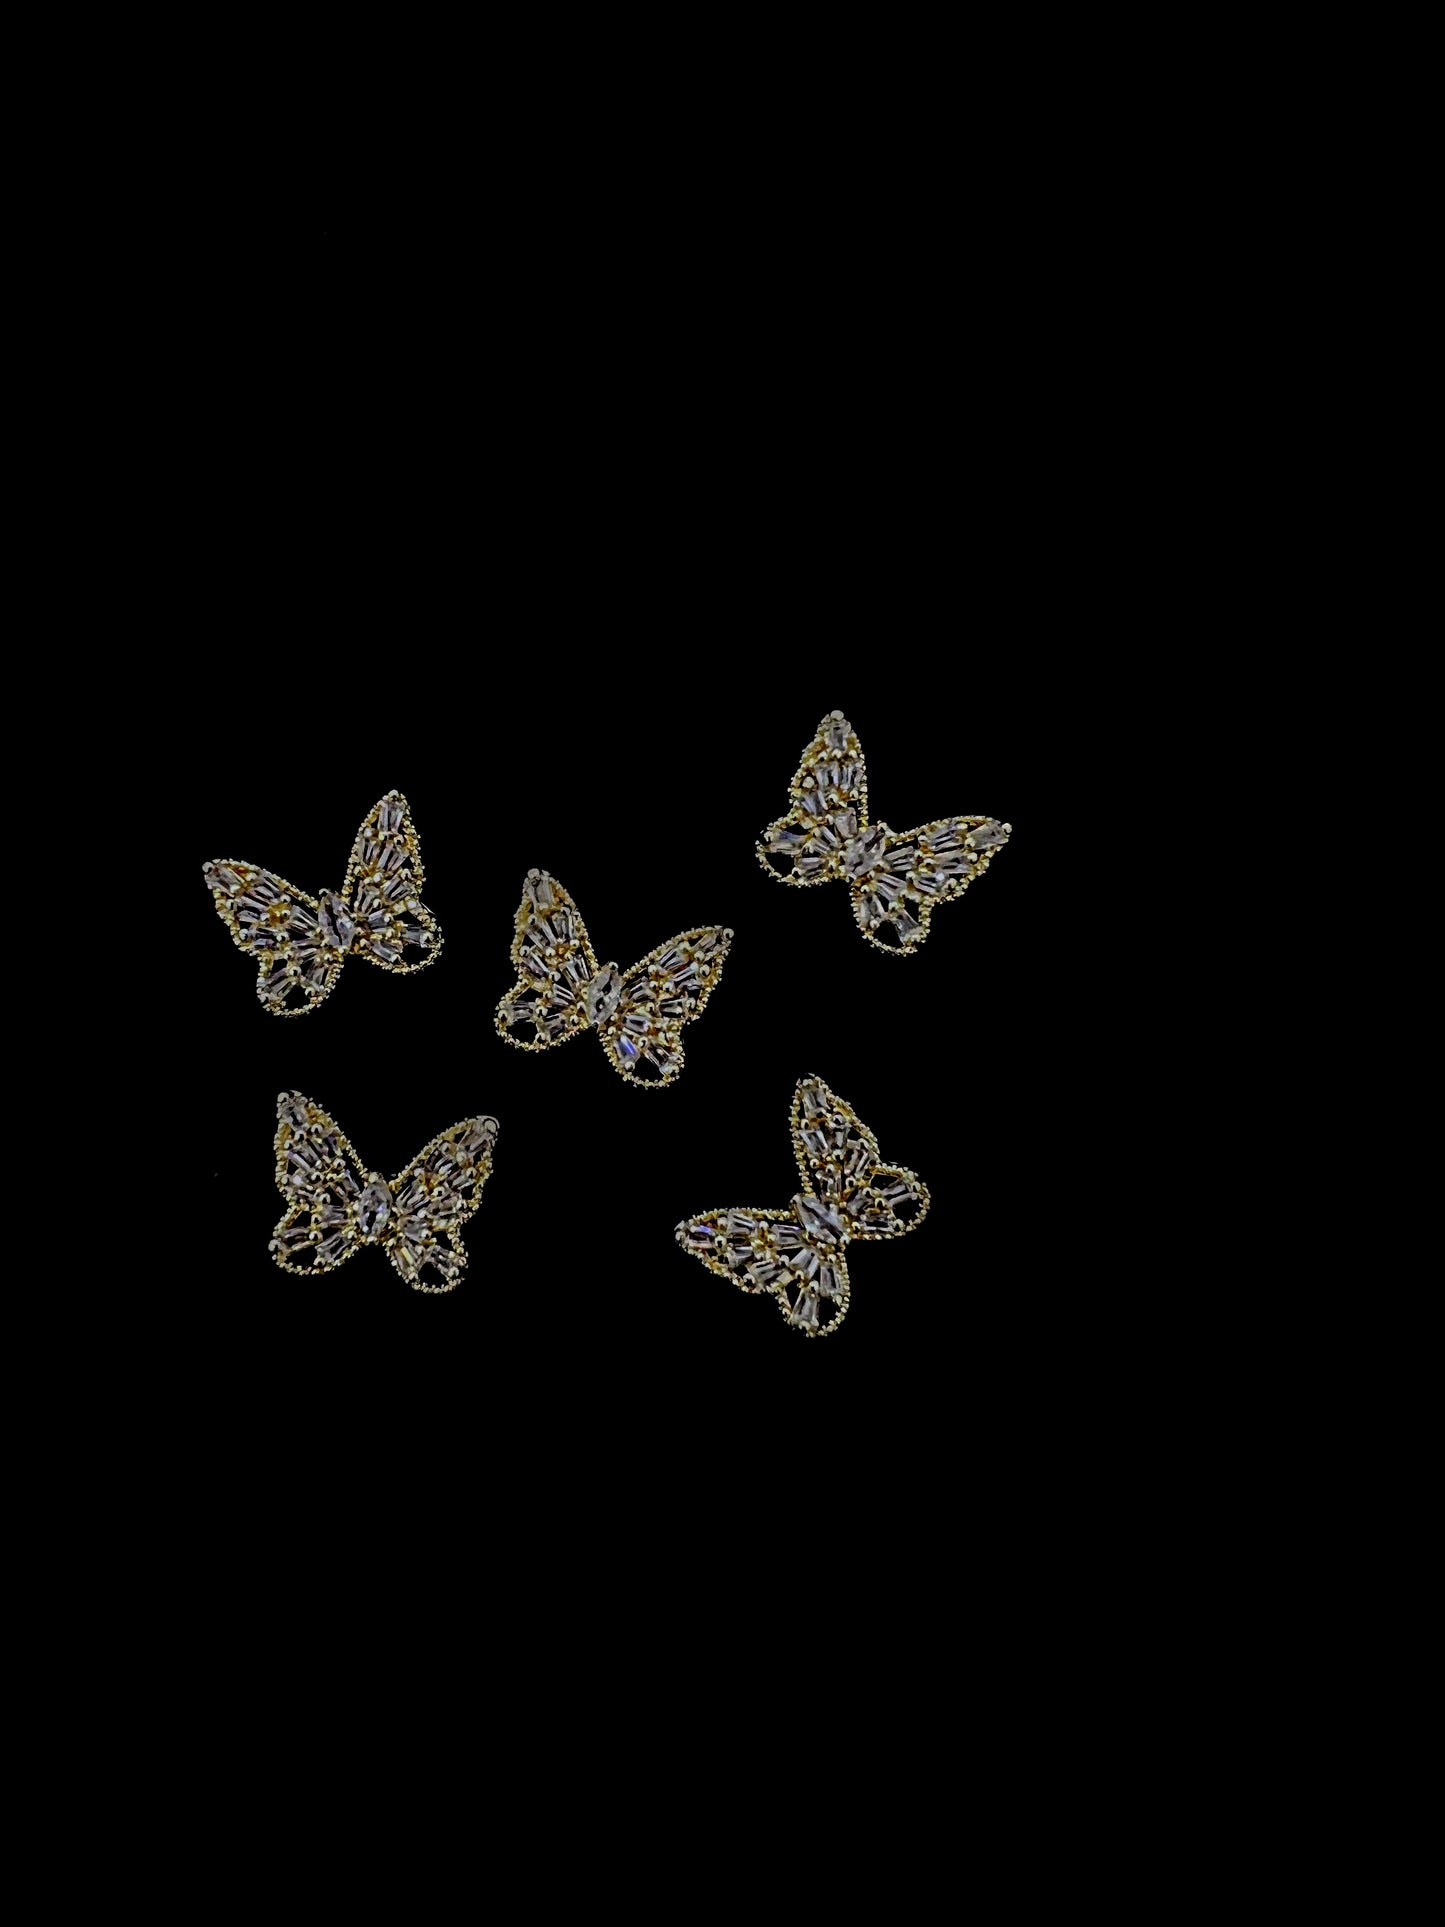 Gold Butterfly Charms